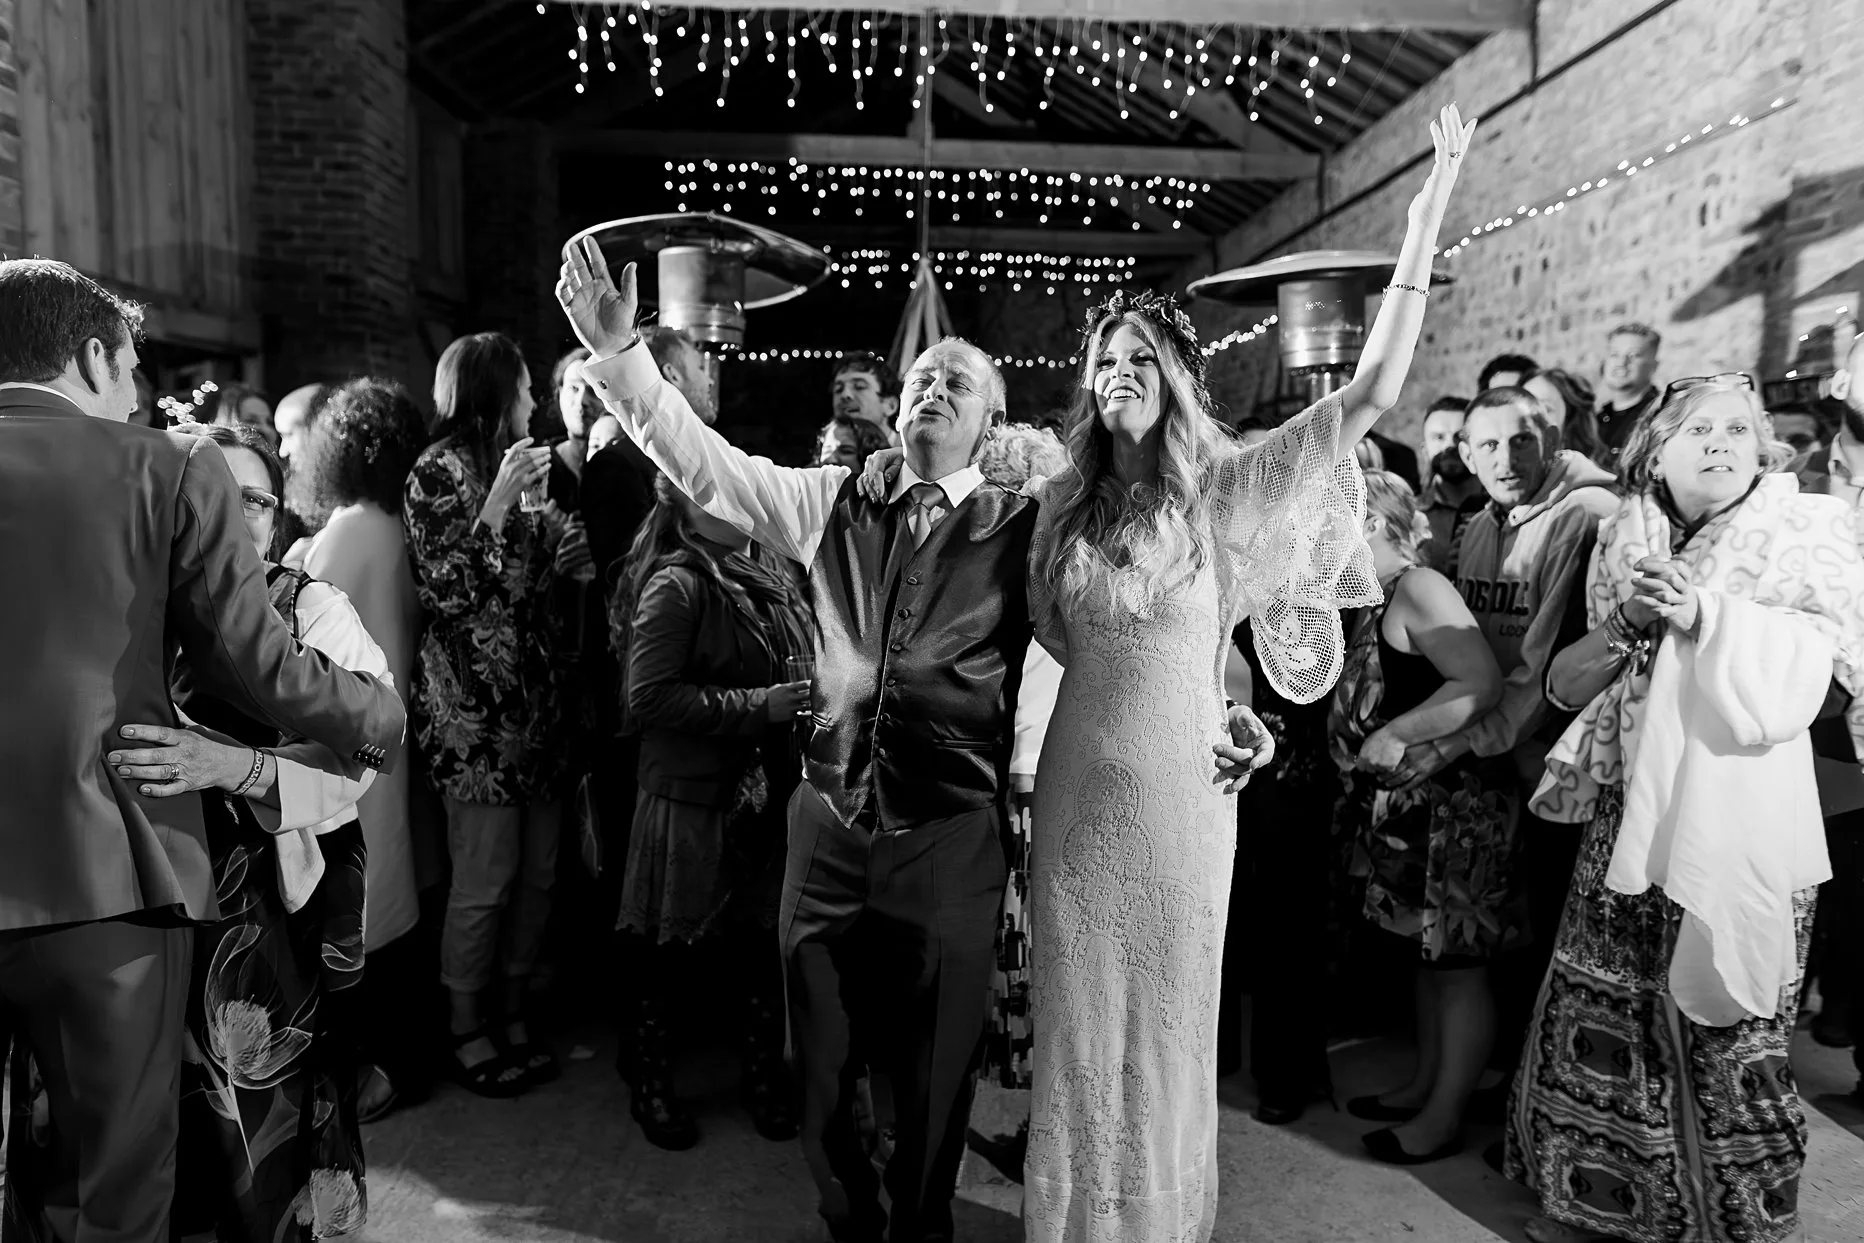 Bride dancing with her dad on the evening of her wedding. Both bride and dad have there hands thrown in the air enjoying the music.